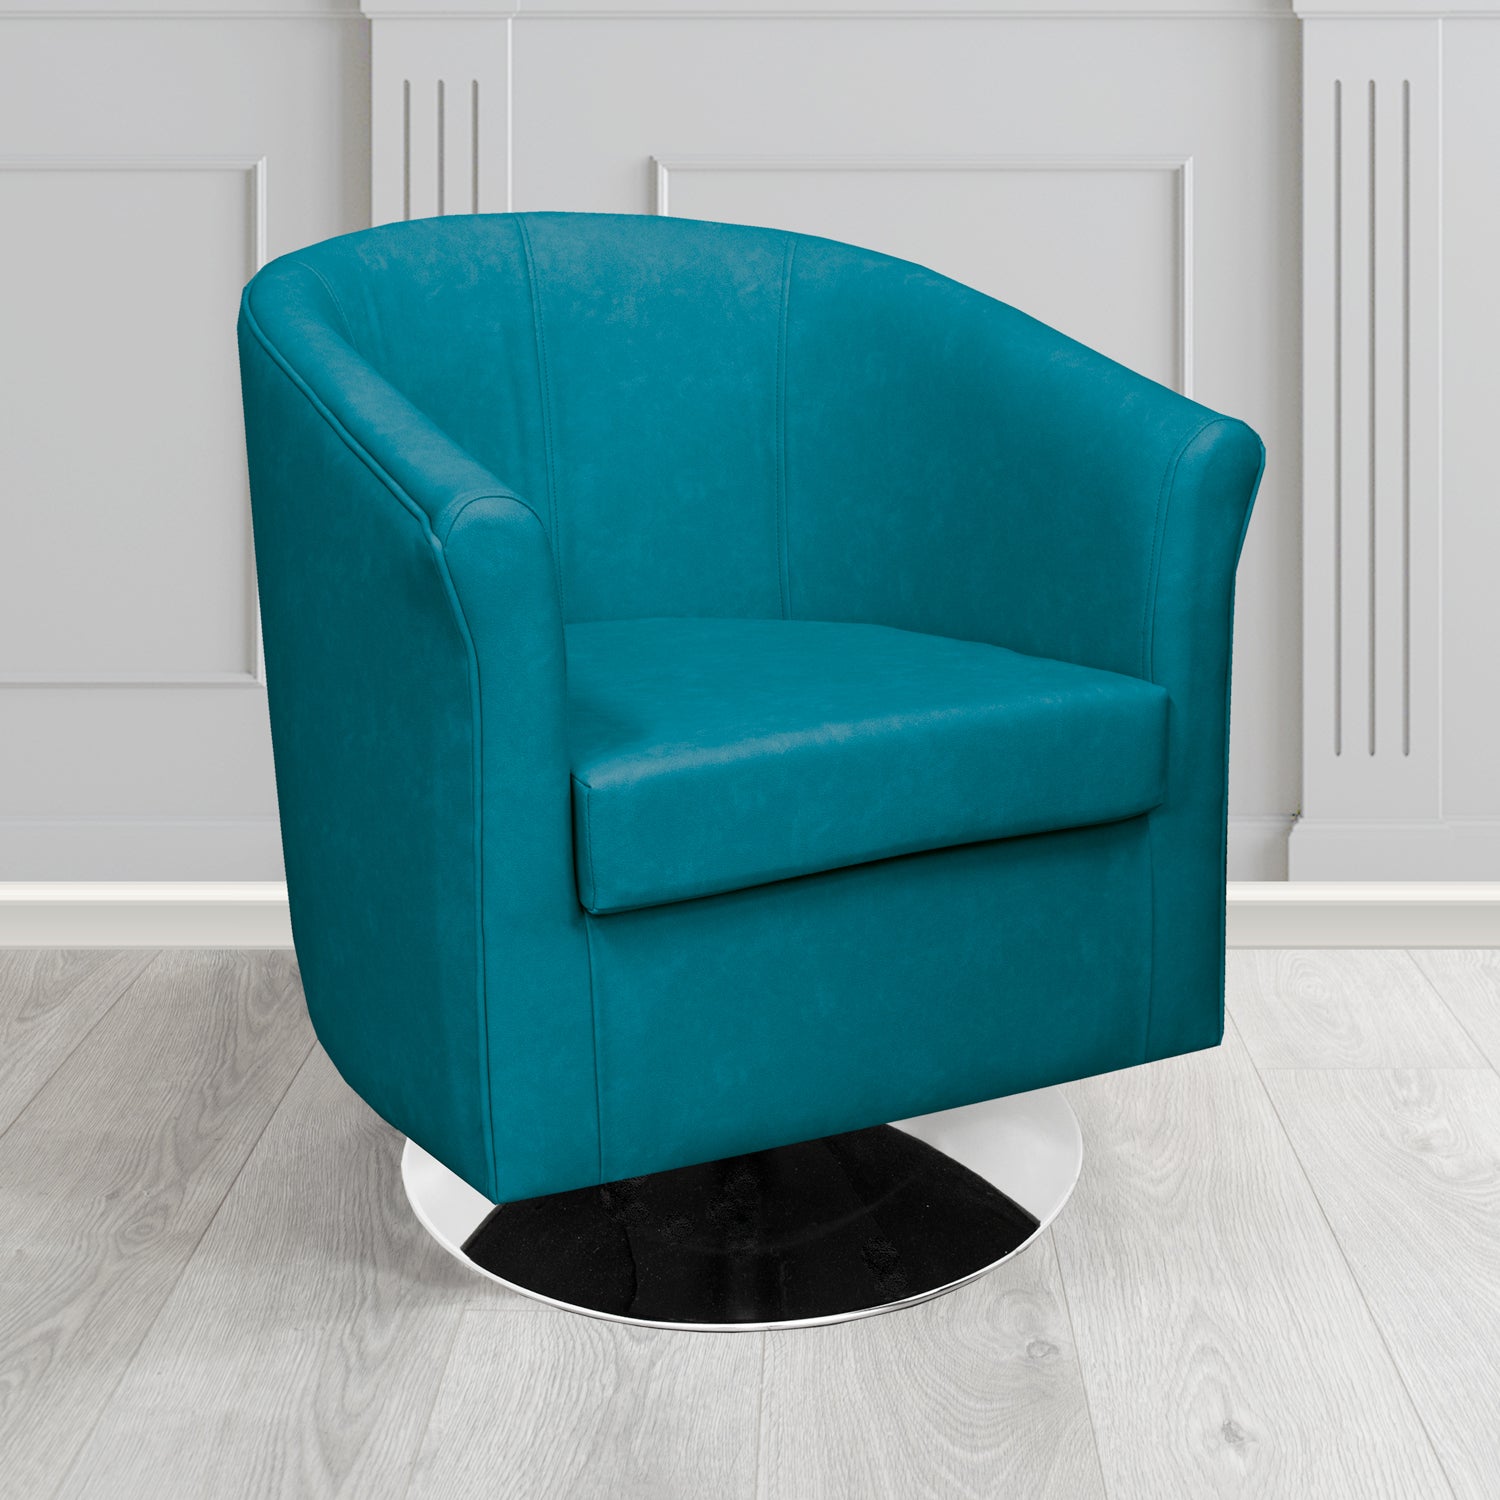 Tuscany Swivel Tub Chair in 5 Infiniti Lagoon INF1854 Antimicrobial Crib 5 Faux Leather - The Tub Chair Shop